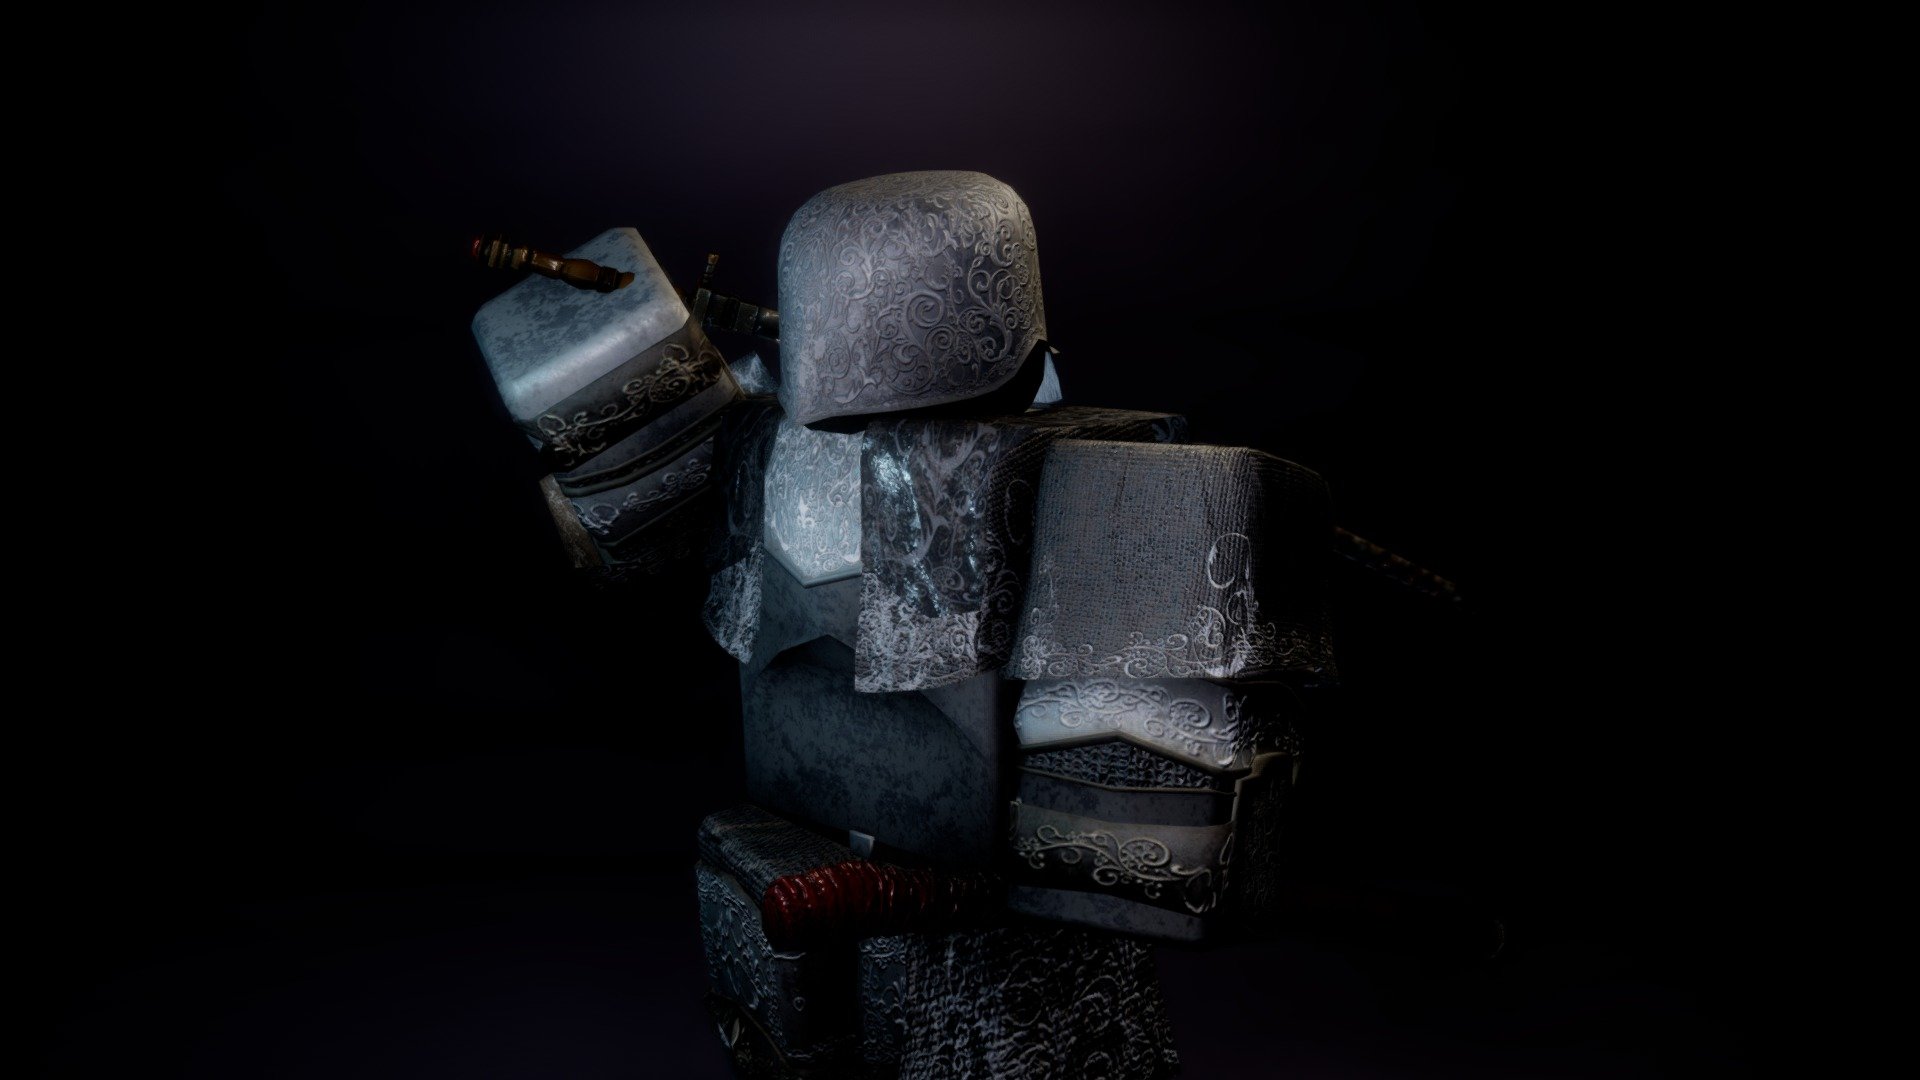 Modeled this for a roblox game I'm working on based off of Bloodborne's Cainhurst Armour. Hope you enjoy it 3d model